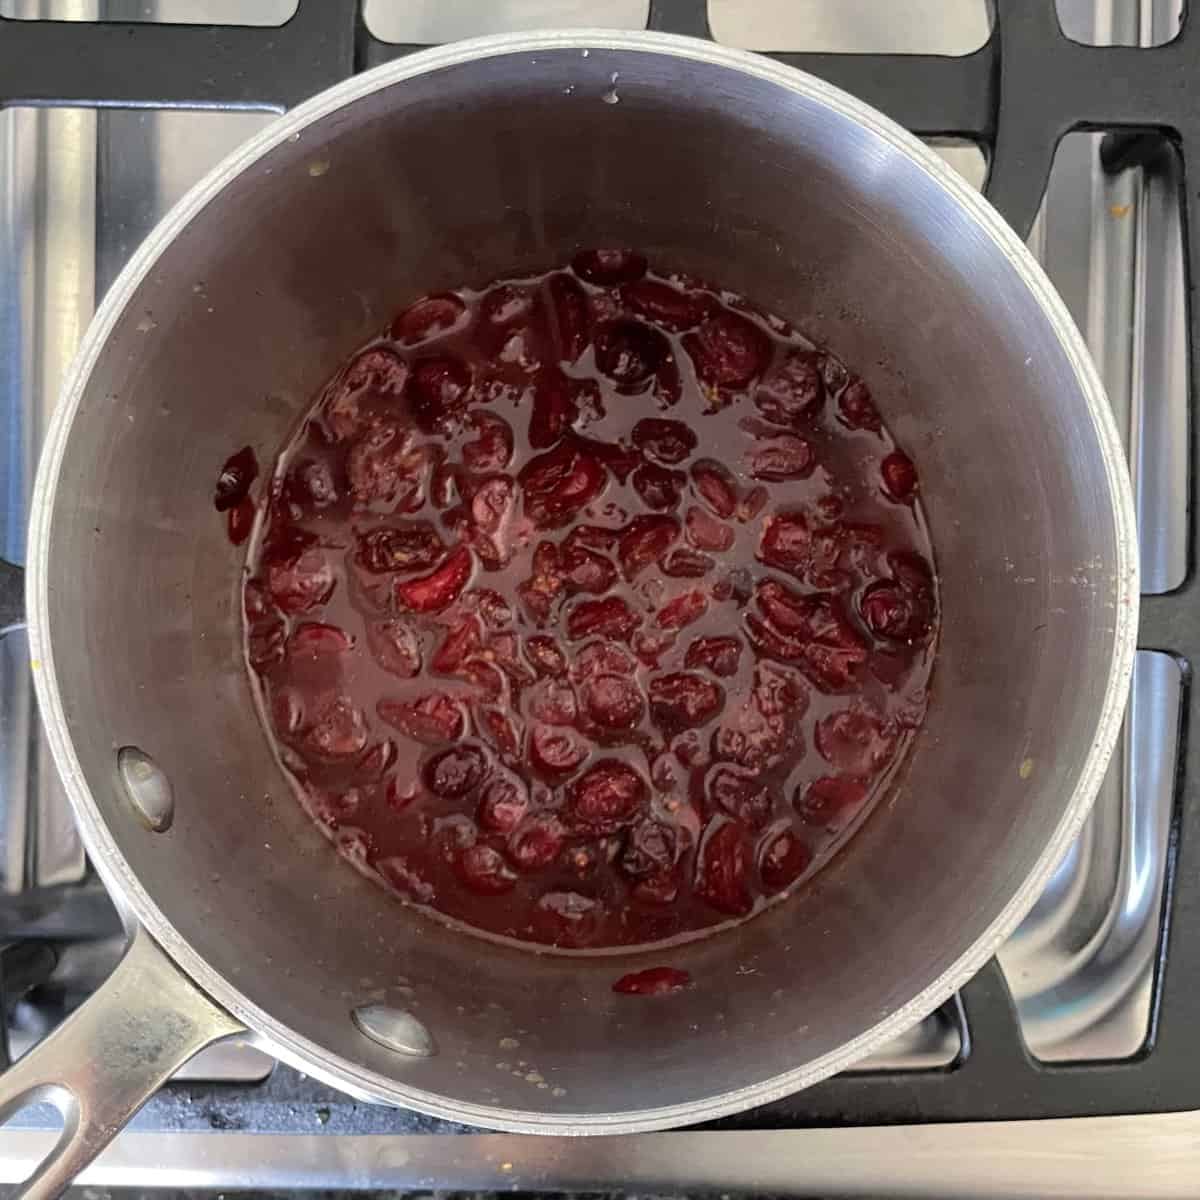 dried cranberries, water, orange zest and other ingredients for cranberry sauce in a pot.